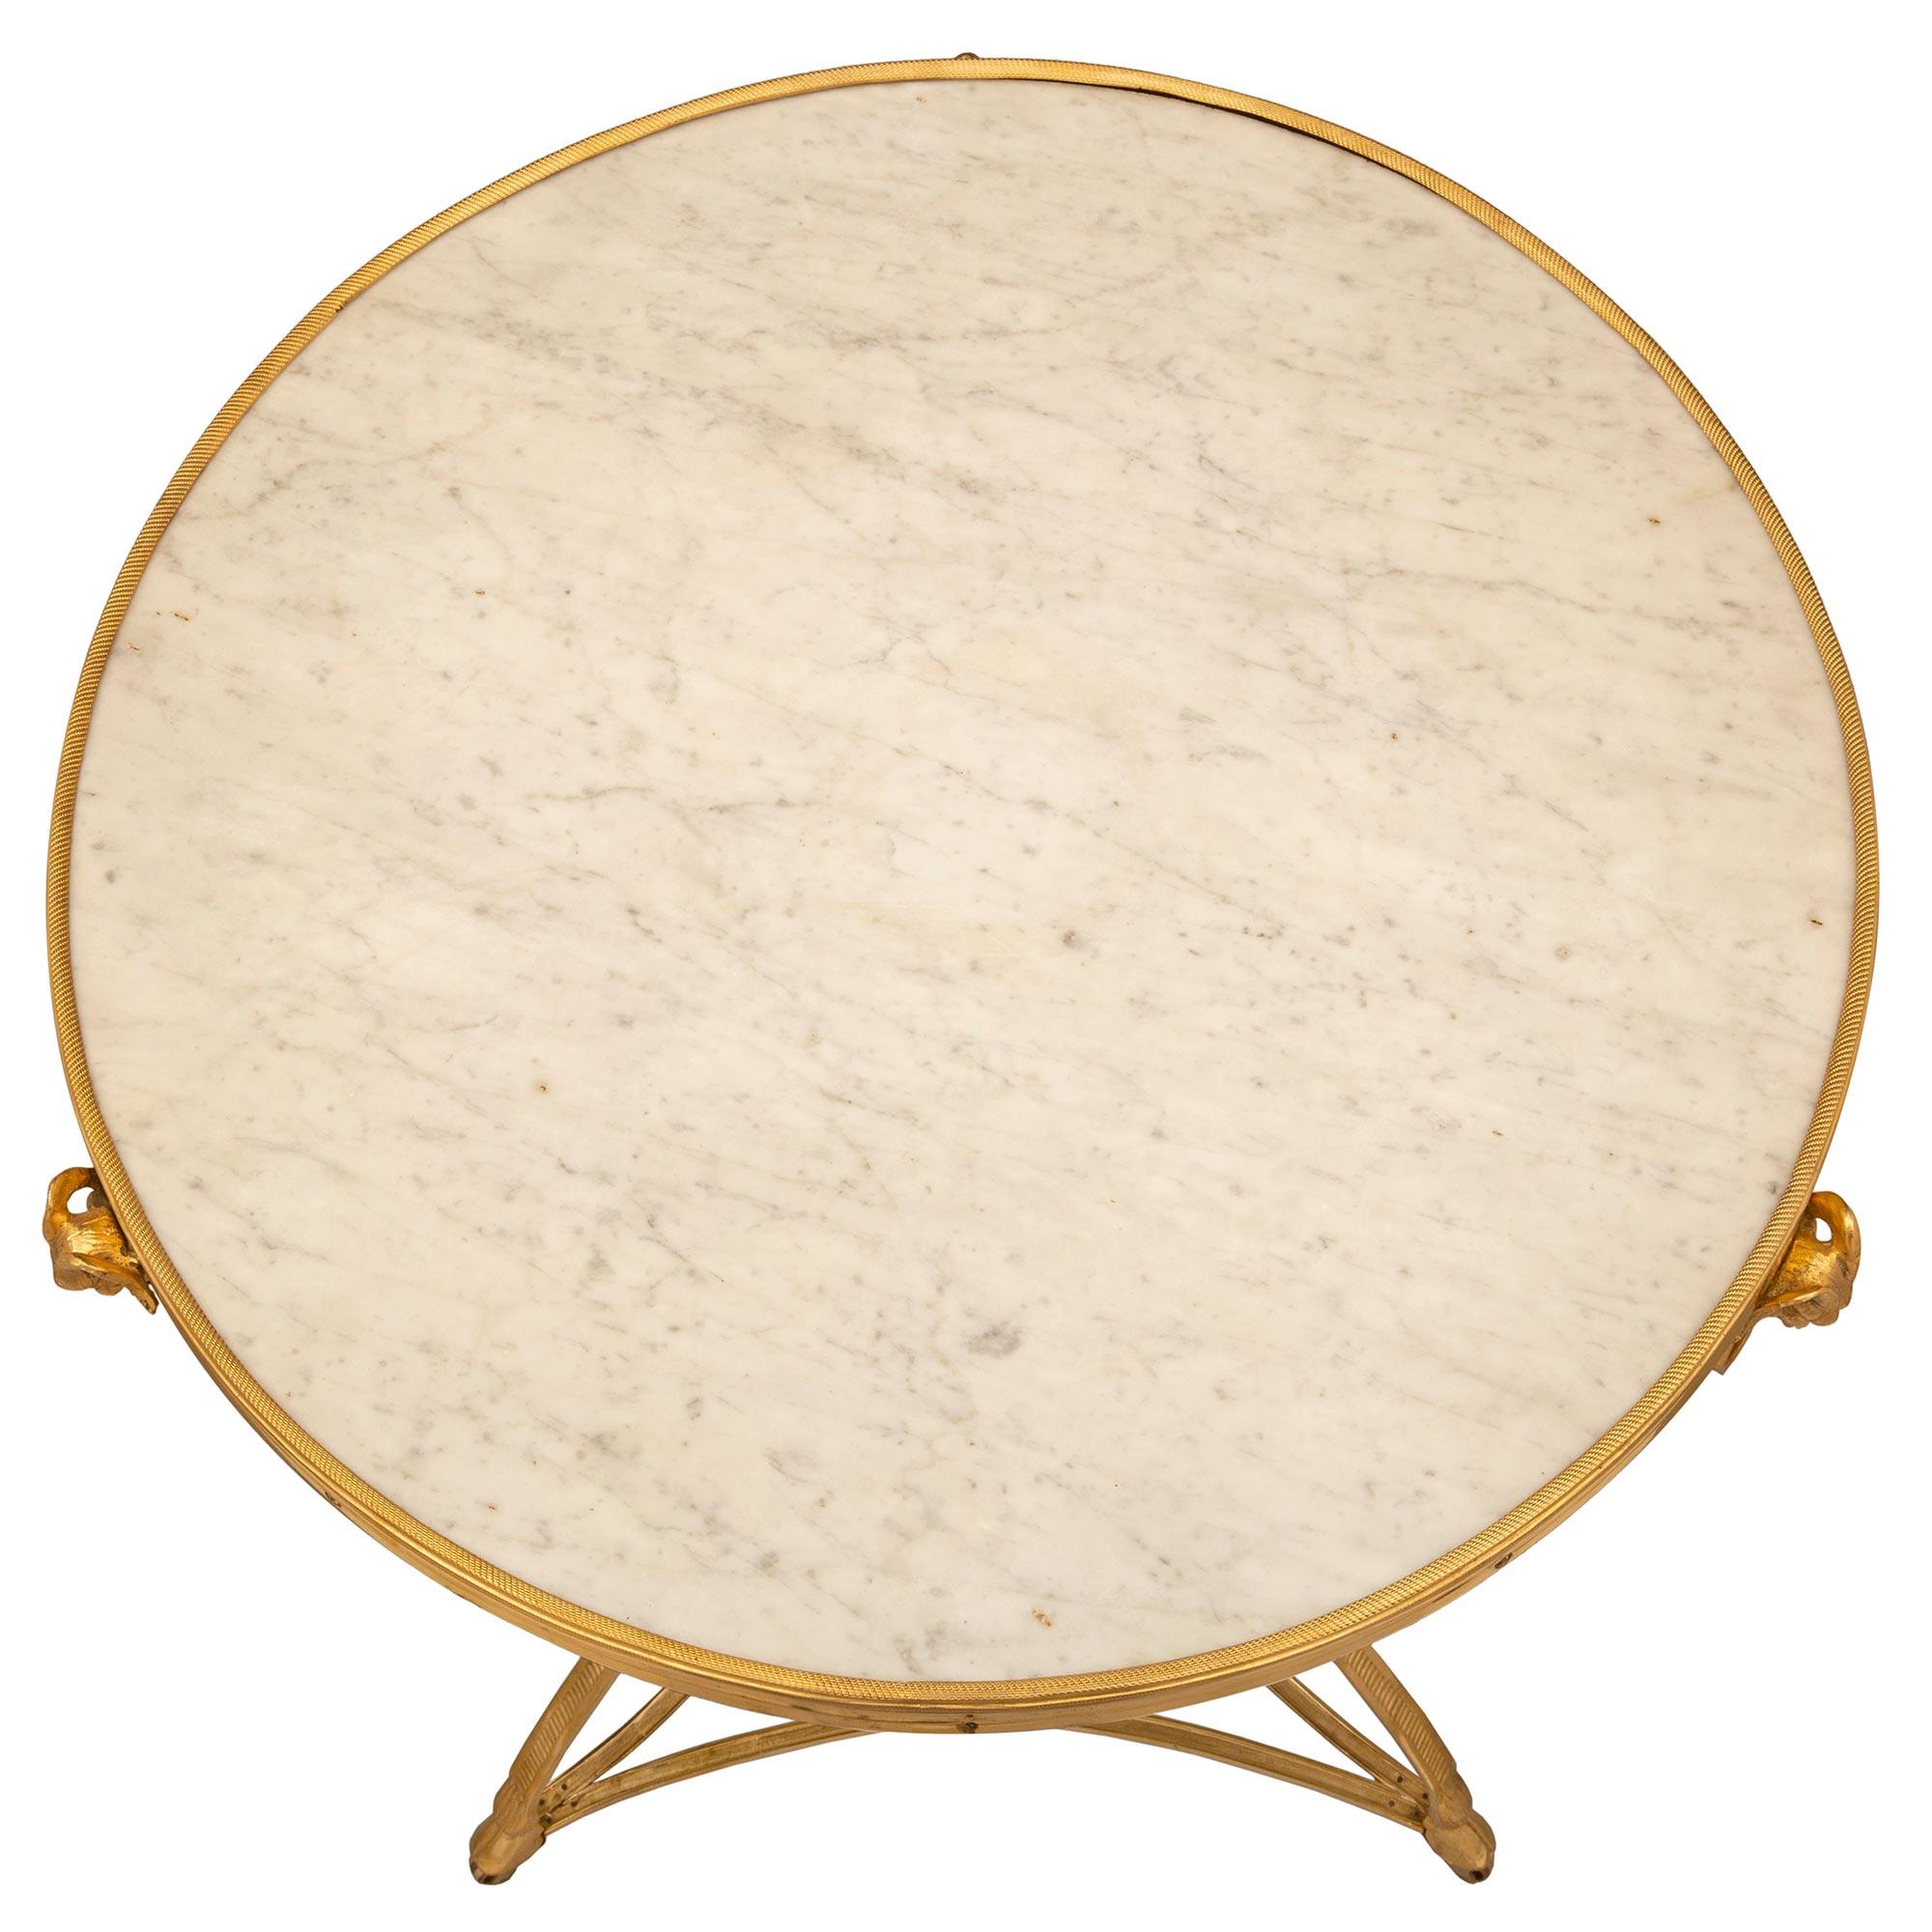 A striking French 19th century Louis XVI st. ormolu and white Carrara marble Gueridon side table. The circular two tiered table is raised on its original casters below elegant hoof feet connected by a most decorative pierced stretcher with concave